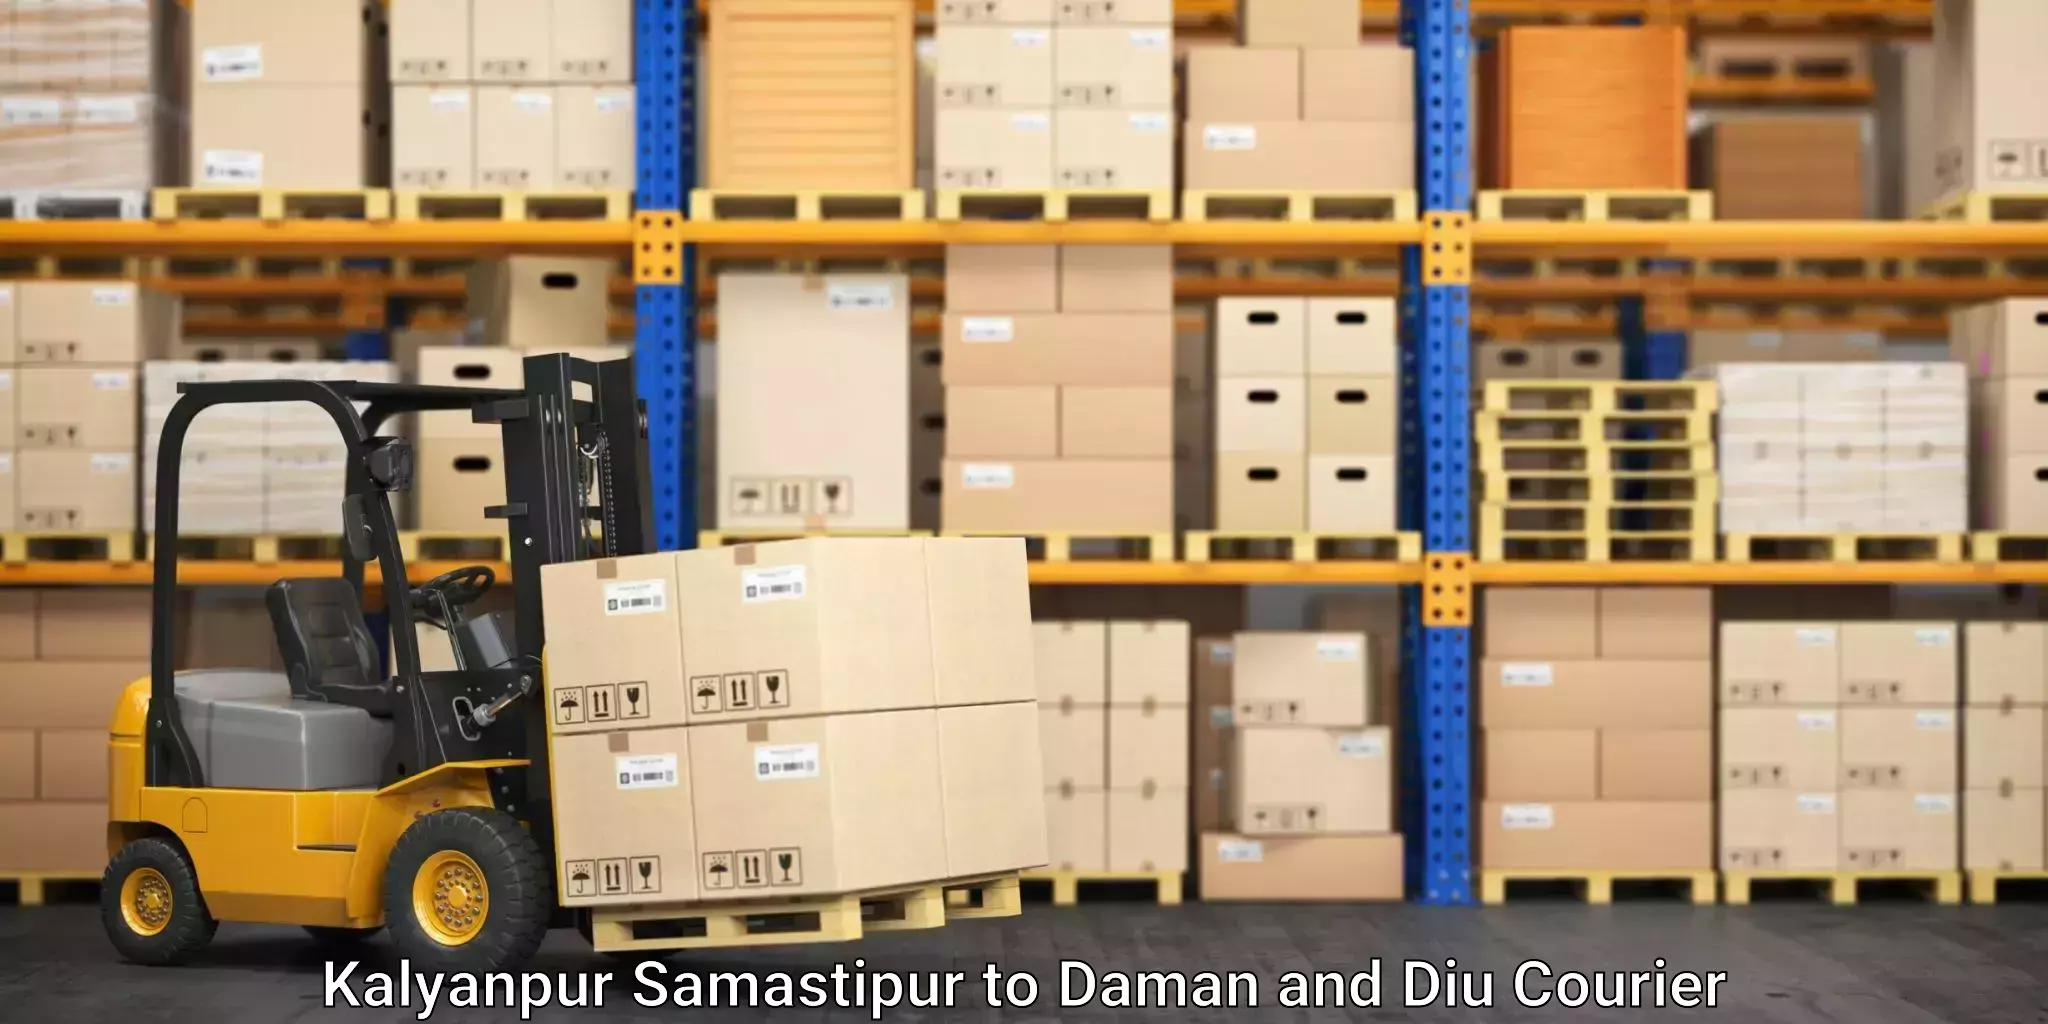 Household goods movers in Kalyanpur Samastipur to Diu